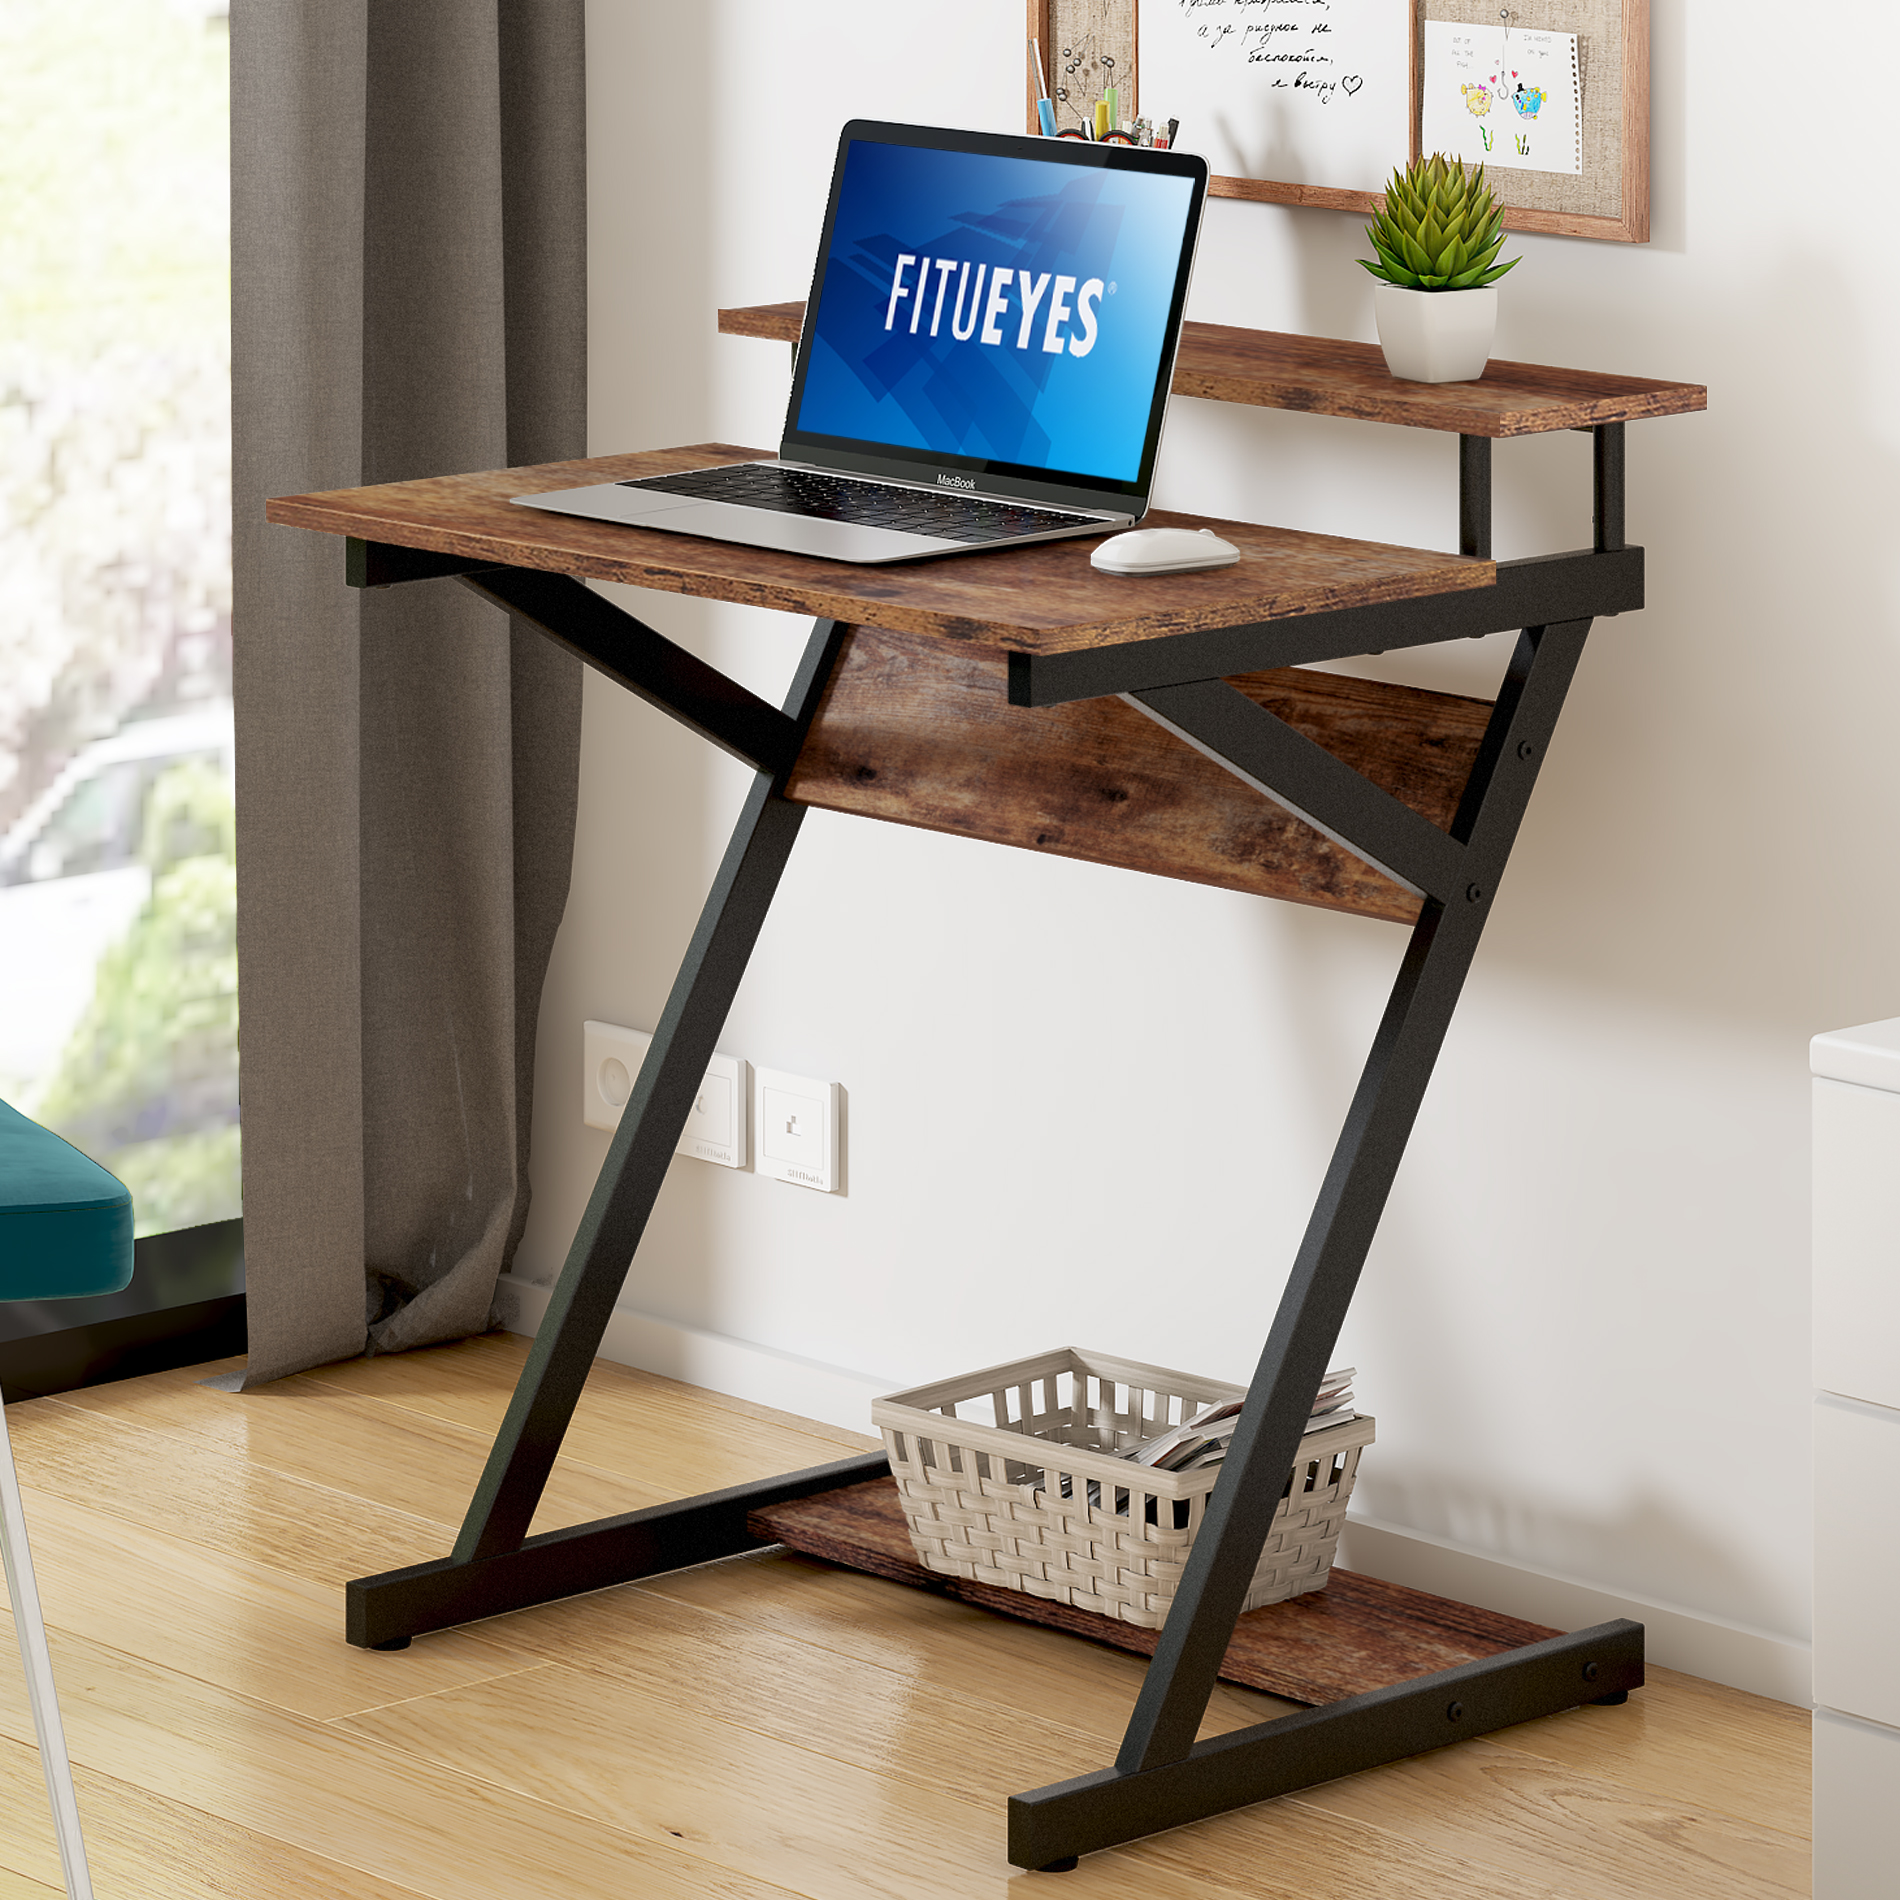 FITUEYES Computer Desk for Small Spaces, 27-Inch Small Desk with Monitor  Shelf  Bottom Storage Shelves, Retro Brown/Black